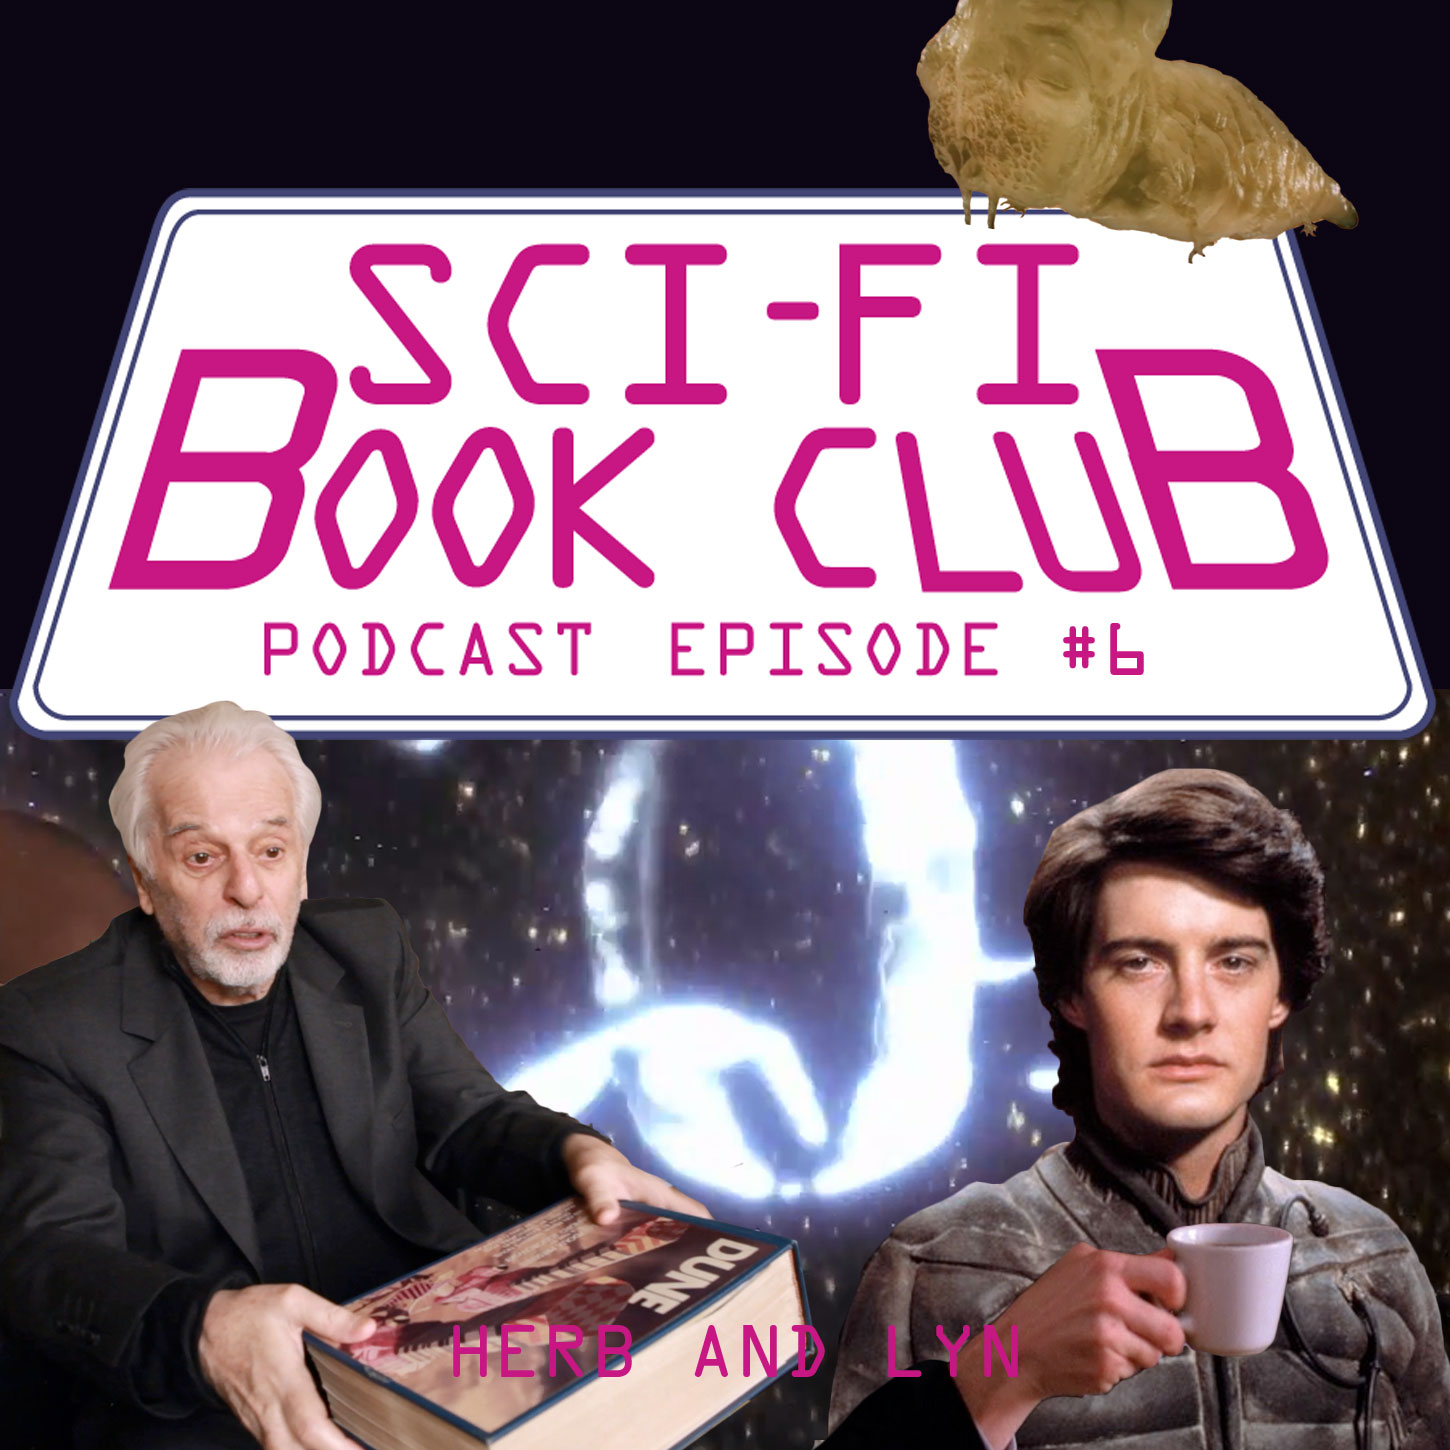 Sci-Fi Book Club Podcast #6: Herb and Lyn